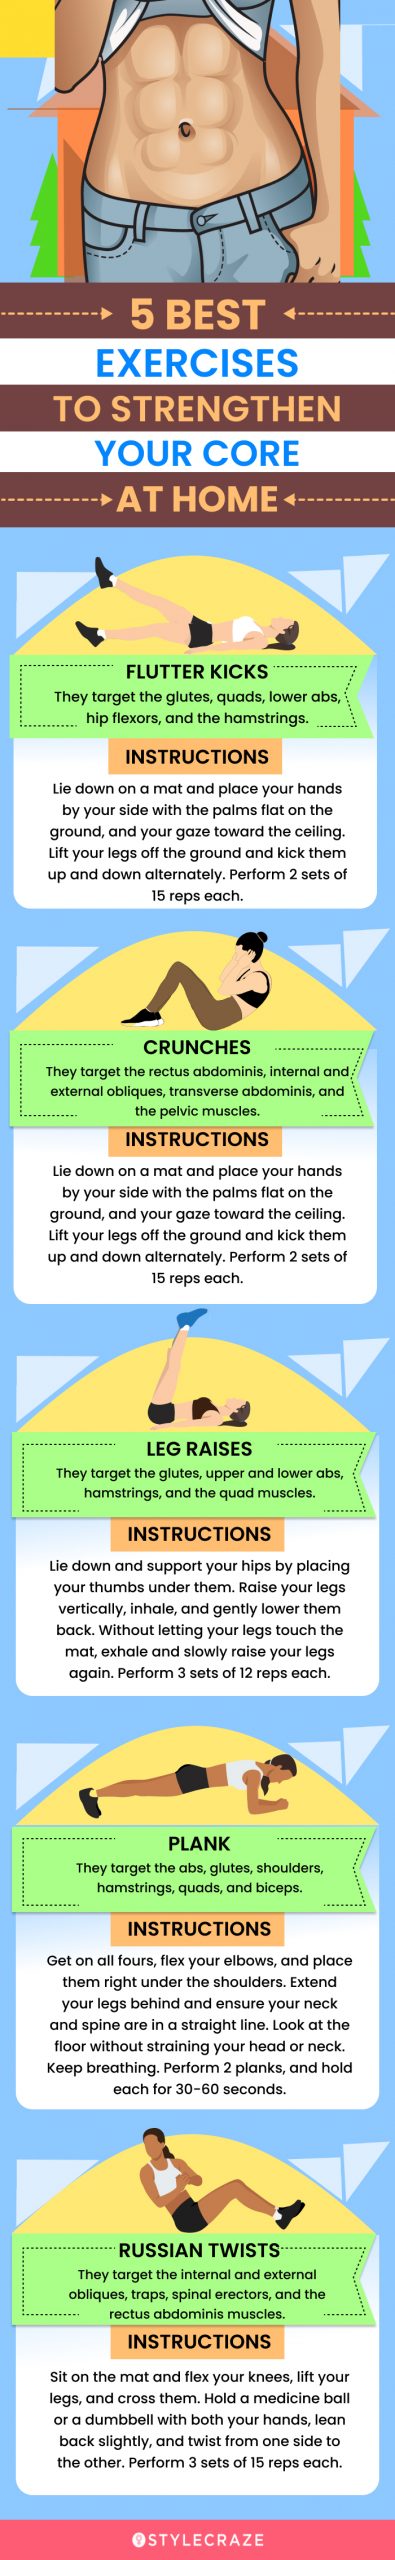 5 best exercises to strengthen your core at home (infographic)